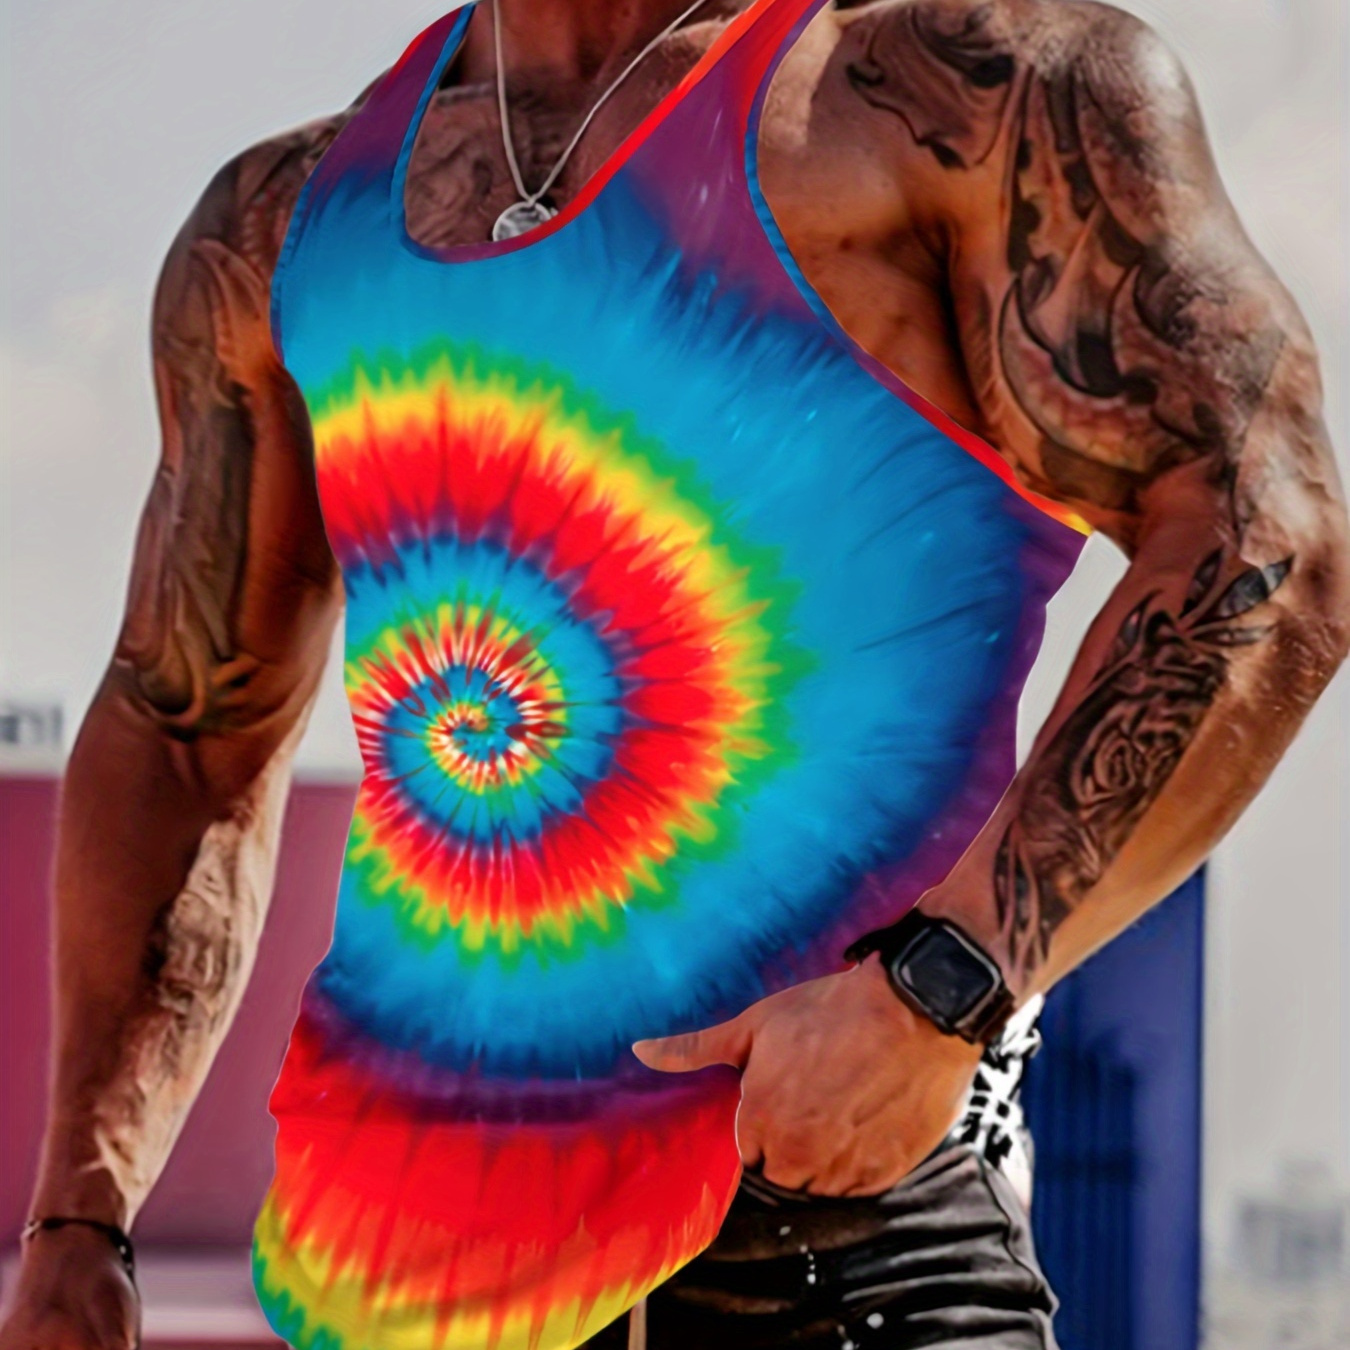 

Colorful Vortex Print Comfy Breathable Tank Top, Men's Casual Stretch Sleeveless T-shirt For Summer Gym Workout Training Basketball